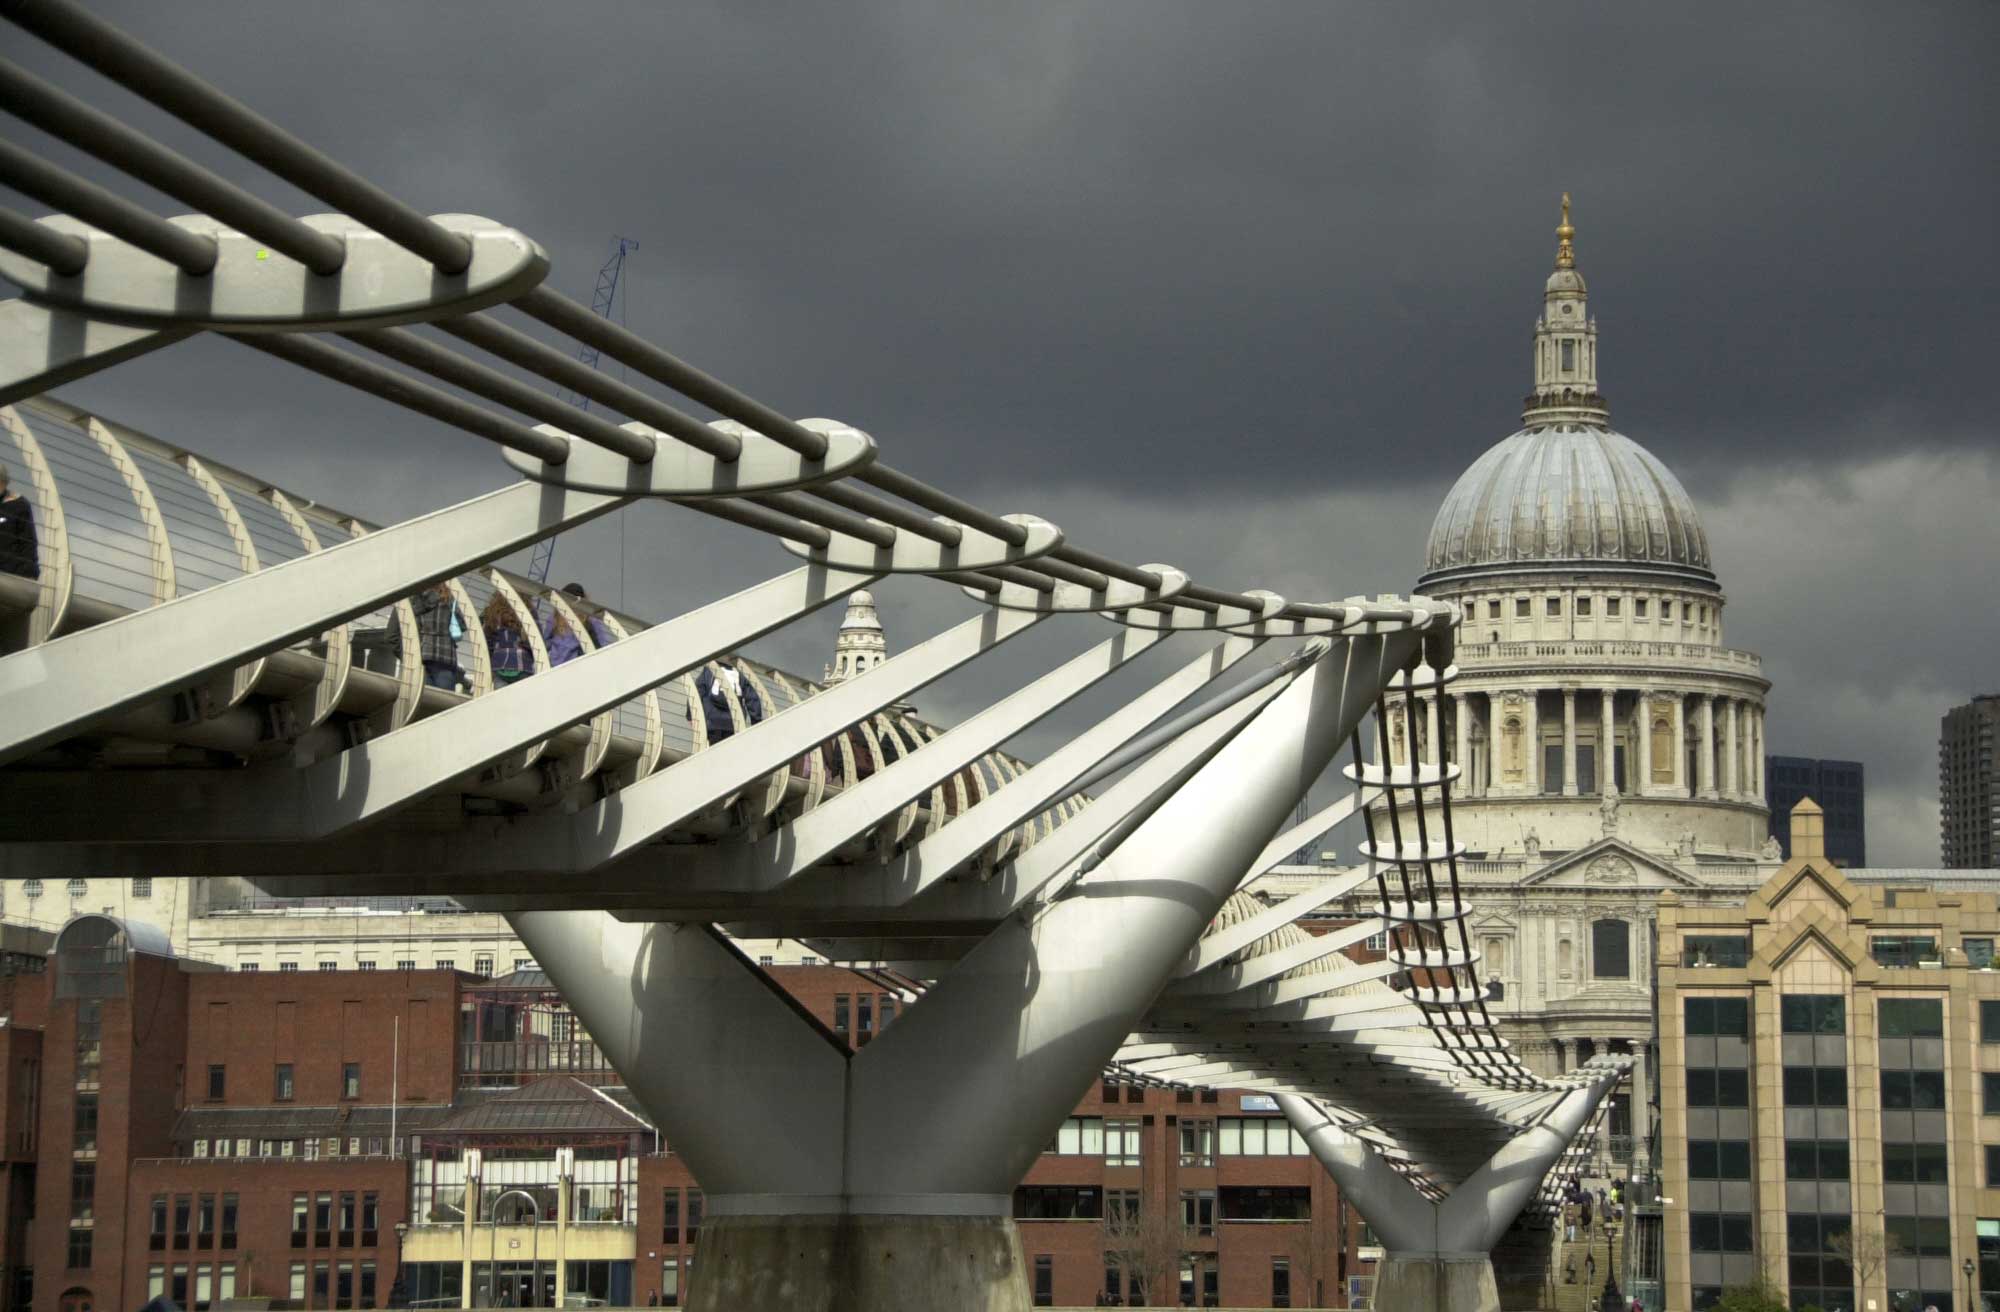 An undulating suspension bridge leading towards an ancient domed cathedral, London